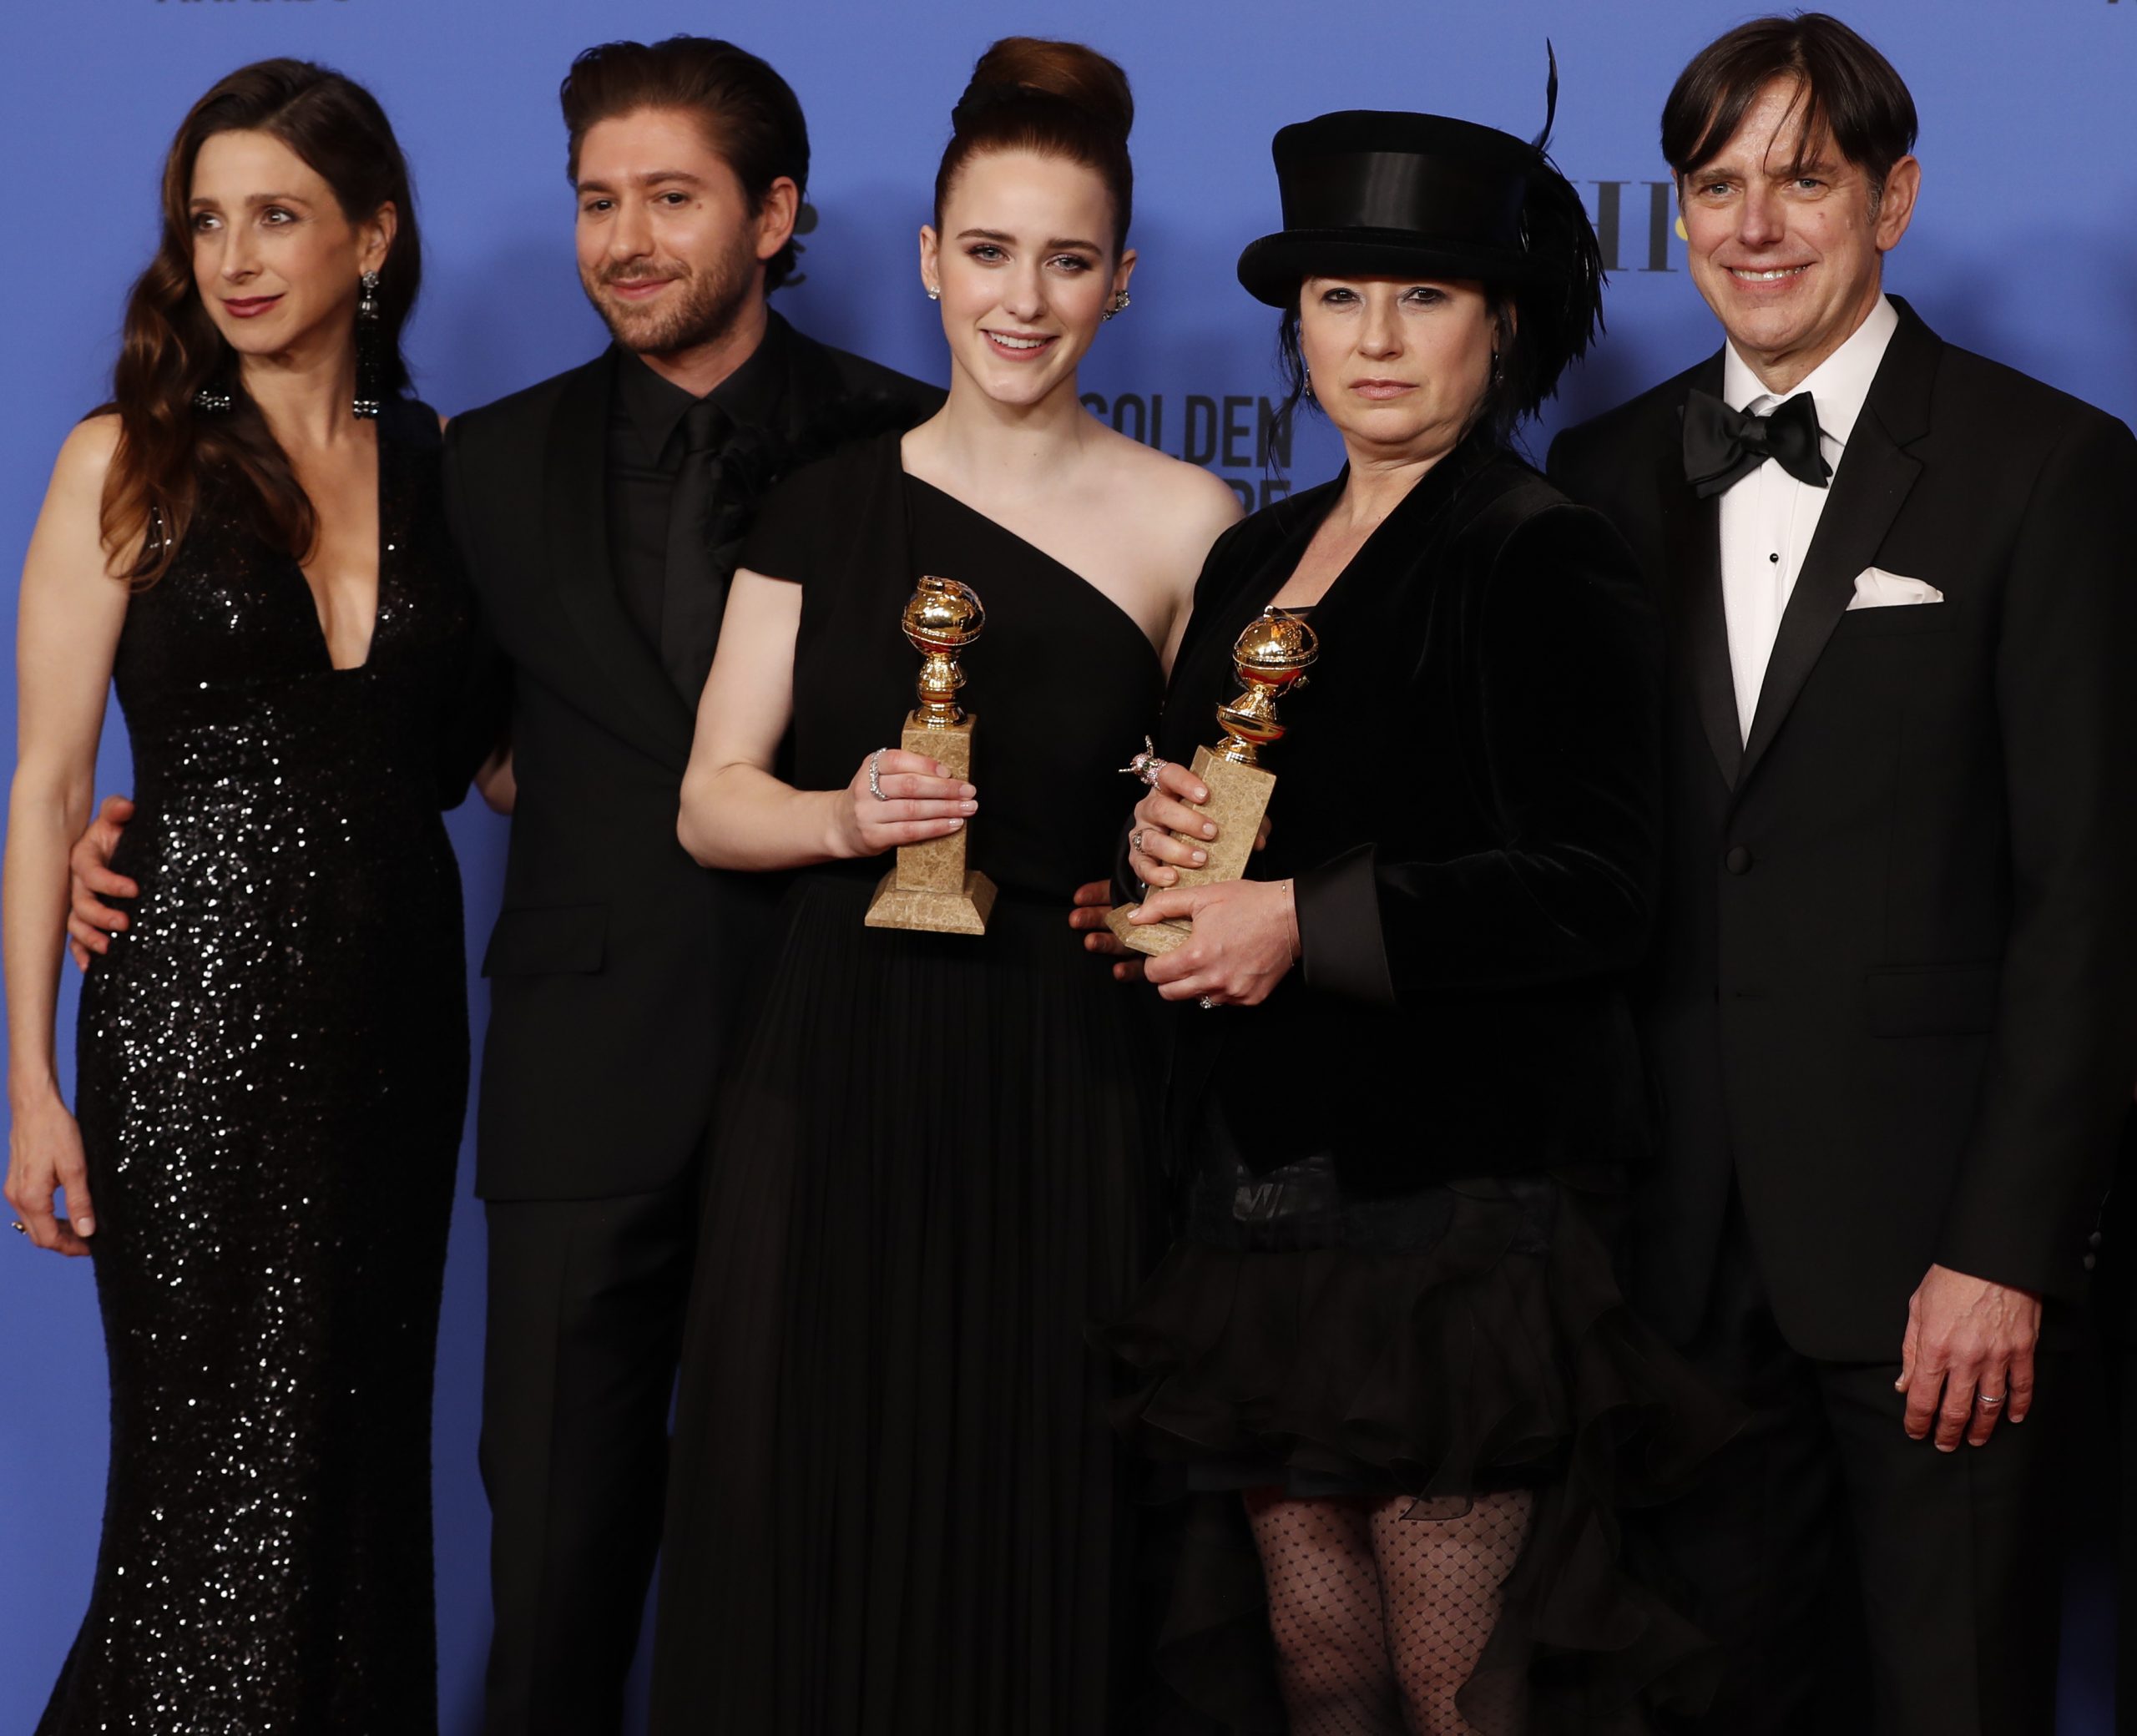 From left, Marin Hinkle, Michael Zegen, Rachel Brosnahan, Amy Sherman-Palladino, Daniel Palladino, and Tony Shalhoub backstage at the 75th Annual Golden Globes at the Beverly Hilton Hotel in Beverly Hills, Calif., on Sunday, Jan. 7, 2018. (Allen J. Schaben/Los Angeles Times/TNS)